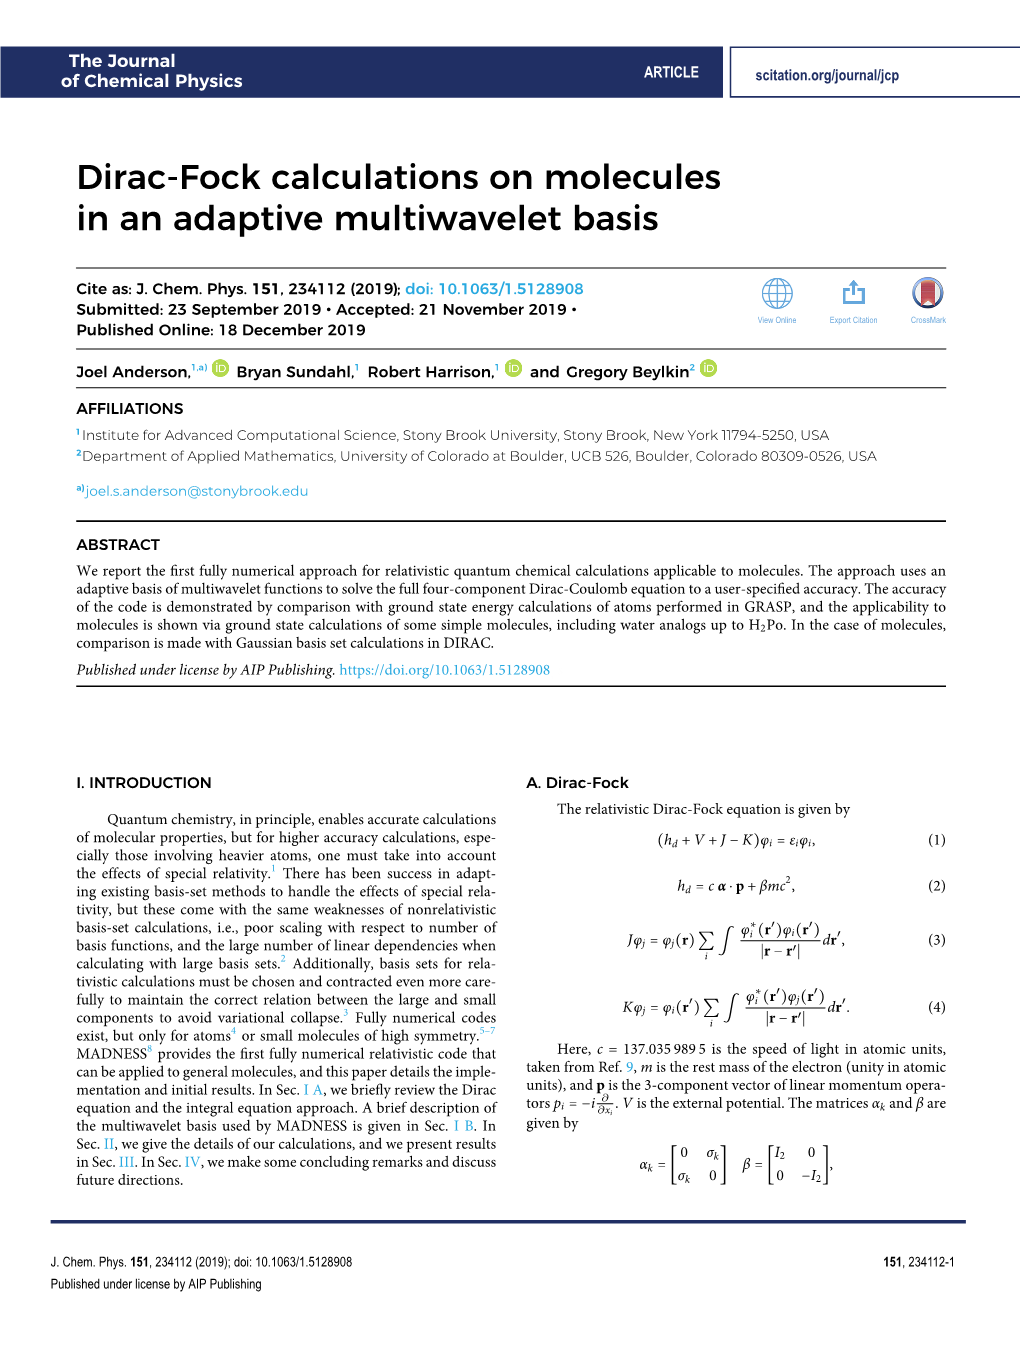 Dirac-Fock Calculations on Molecules in an Adaptive Multiwavelet Basis